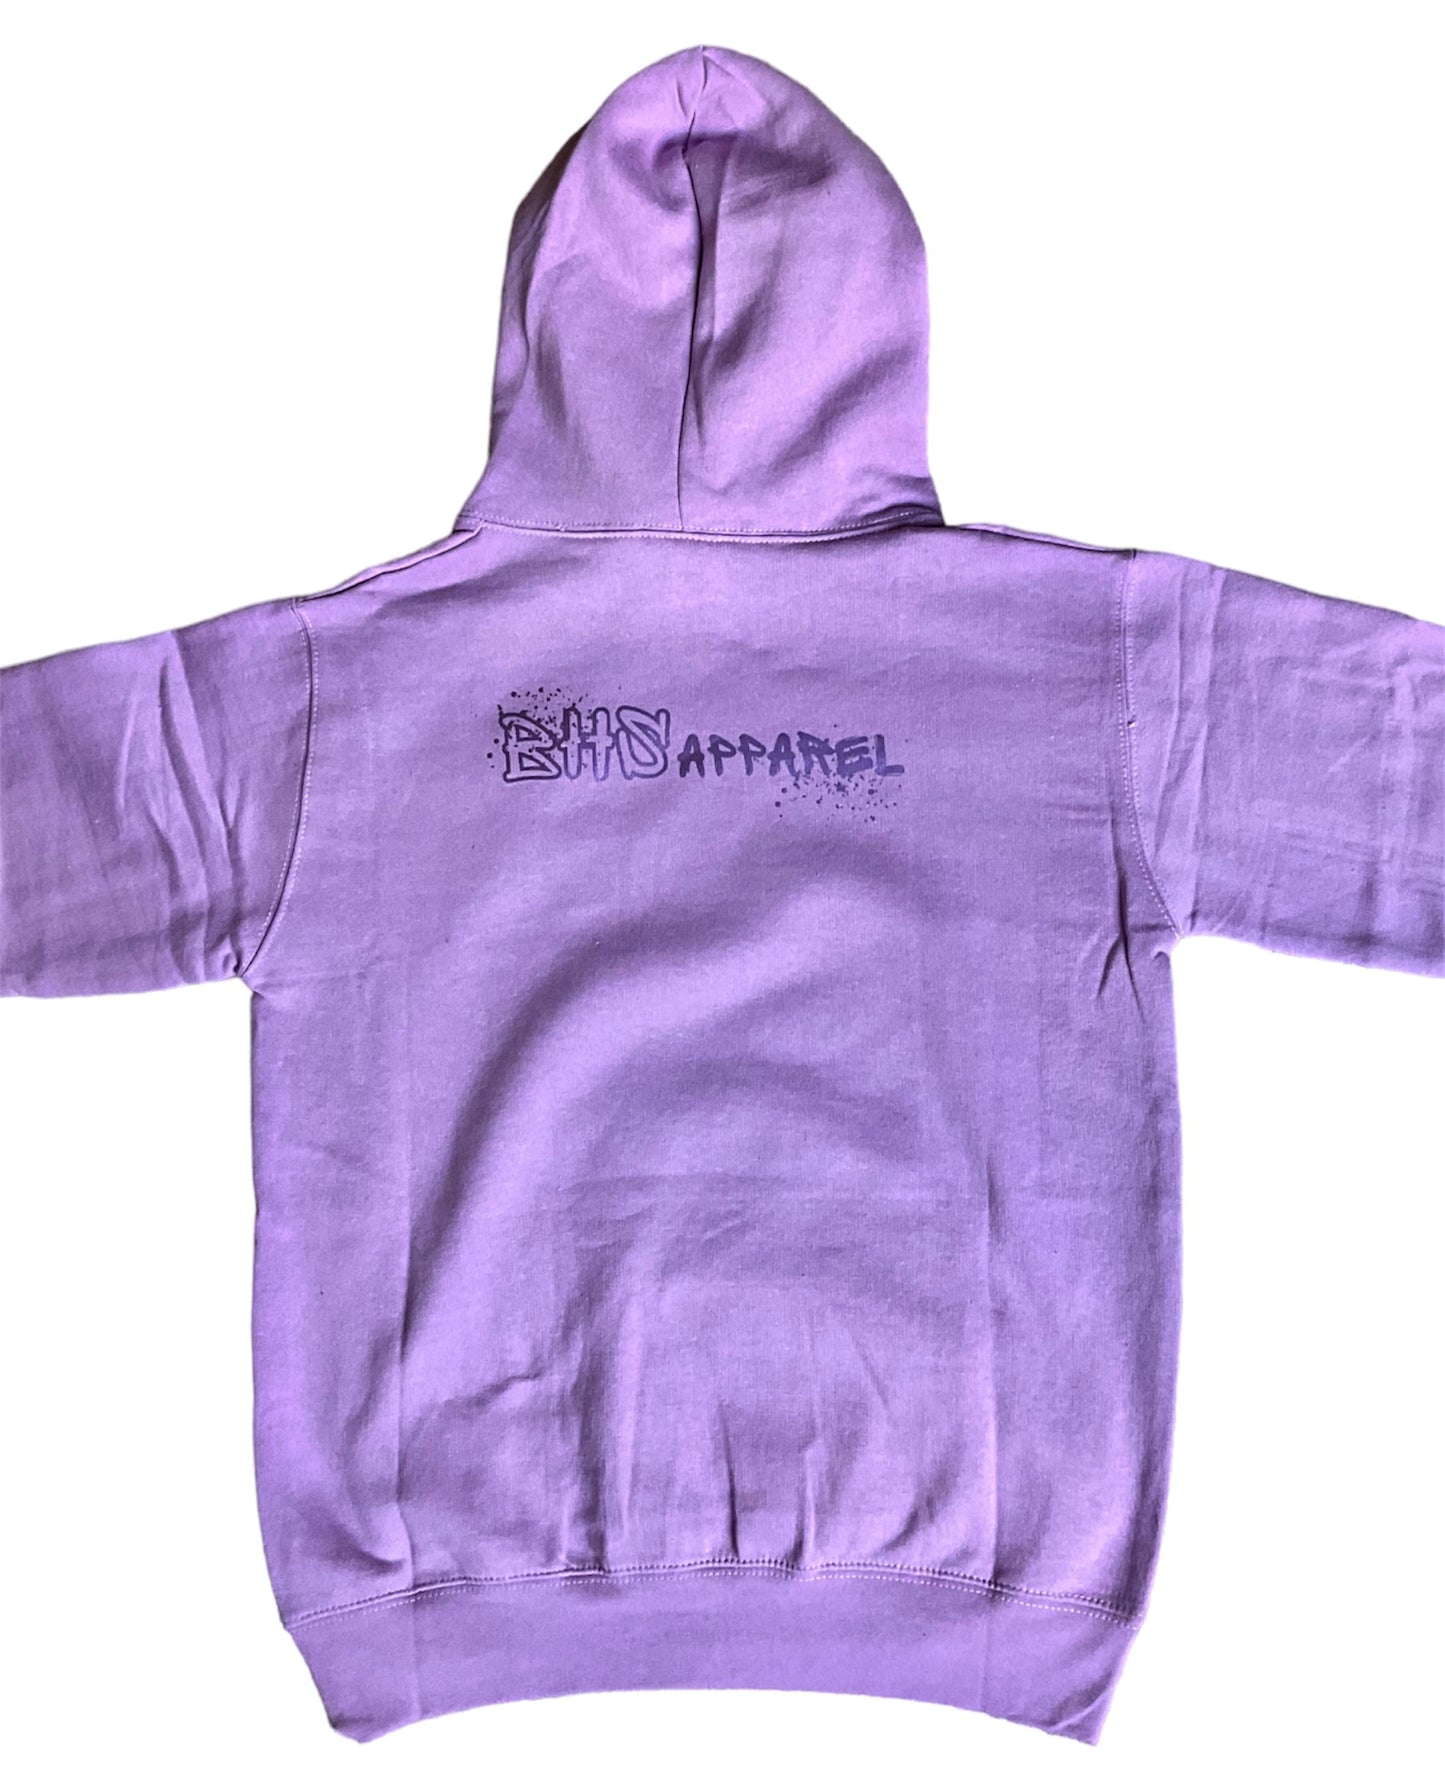 Healed By His Stripes Graffiti Hoodie - lilac + metallic purple (front & back)